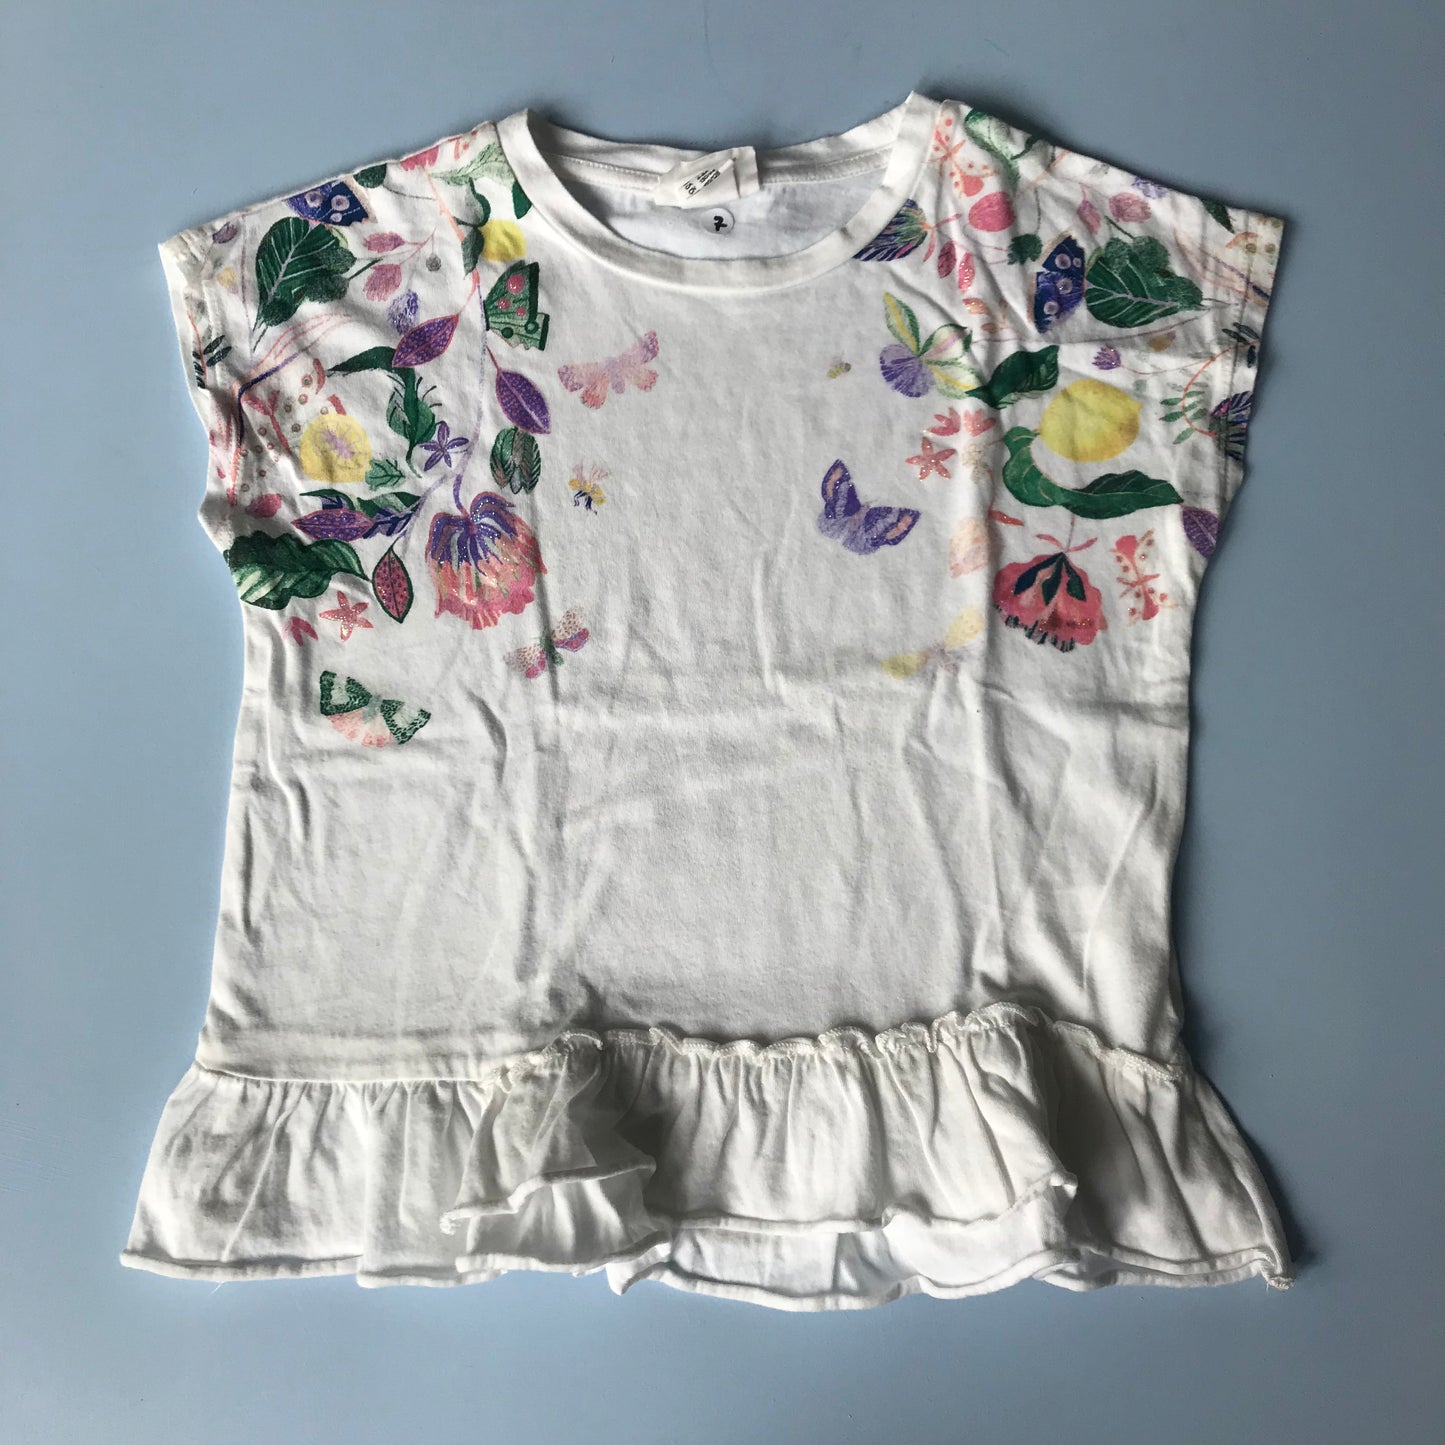 T-shirt - White Floral & Frill - Age 7